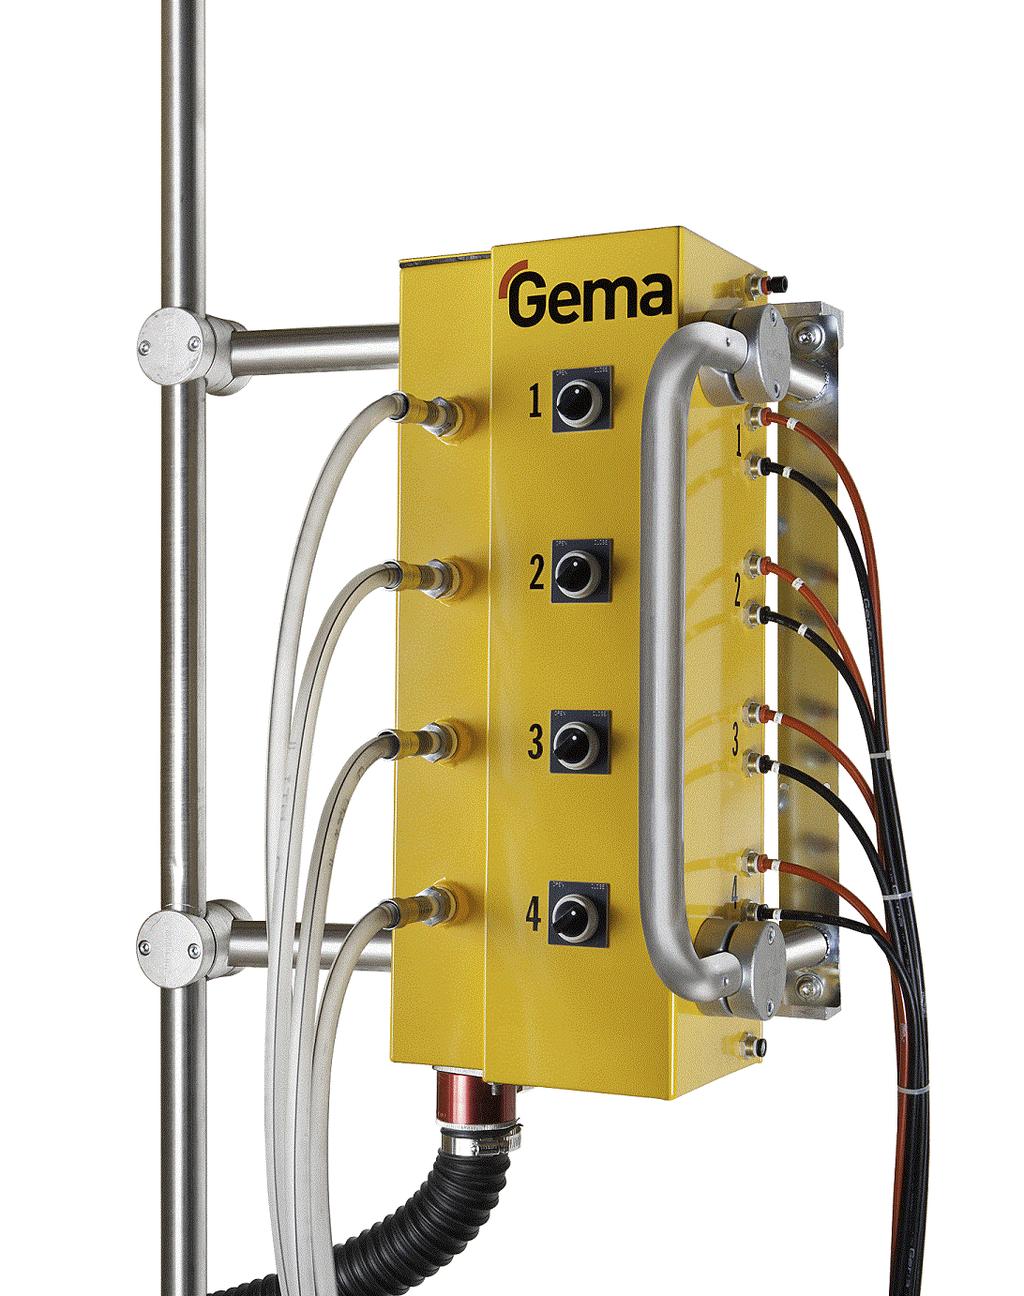 Gema s OptiClr System The Gema OptiClr system is a simple, lw cst quick clr change slutin fr manual gun users that have multiple hppers set up t spray varius clrs.